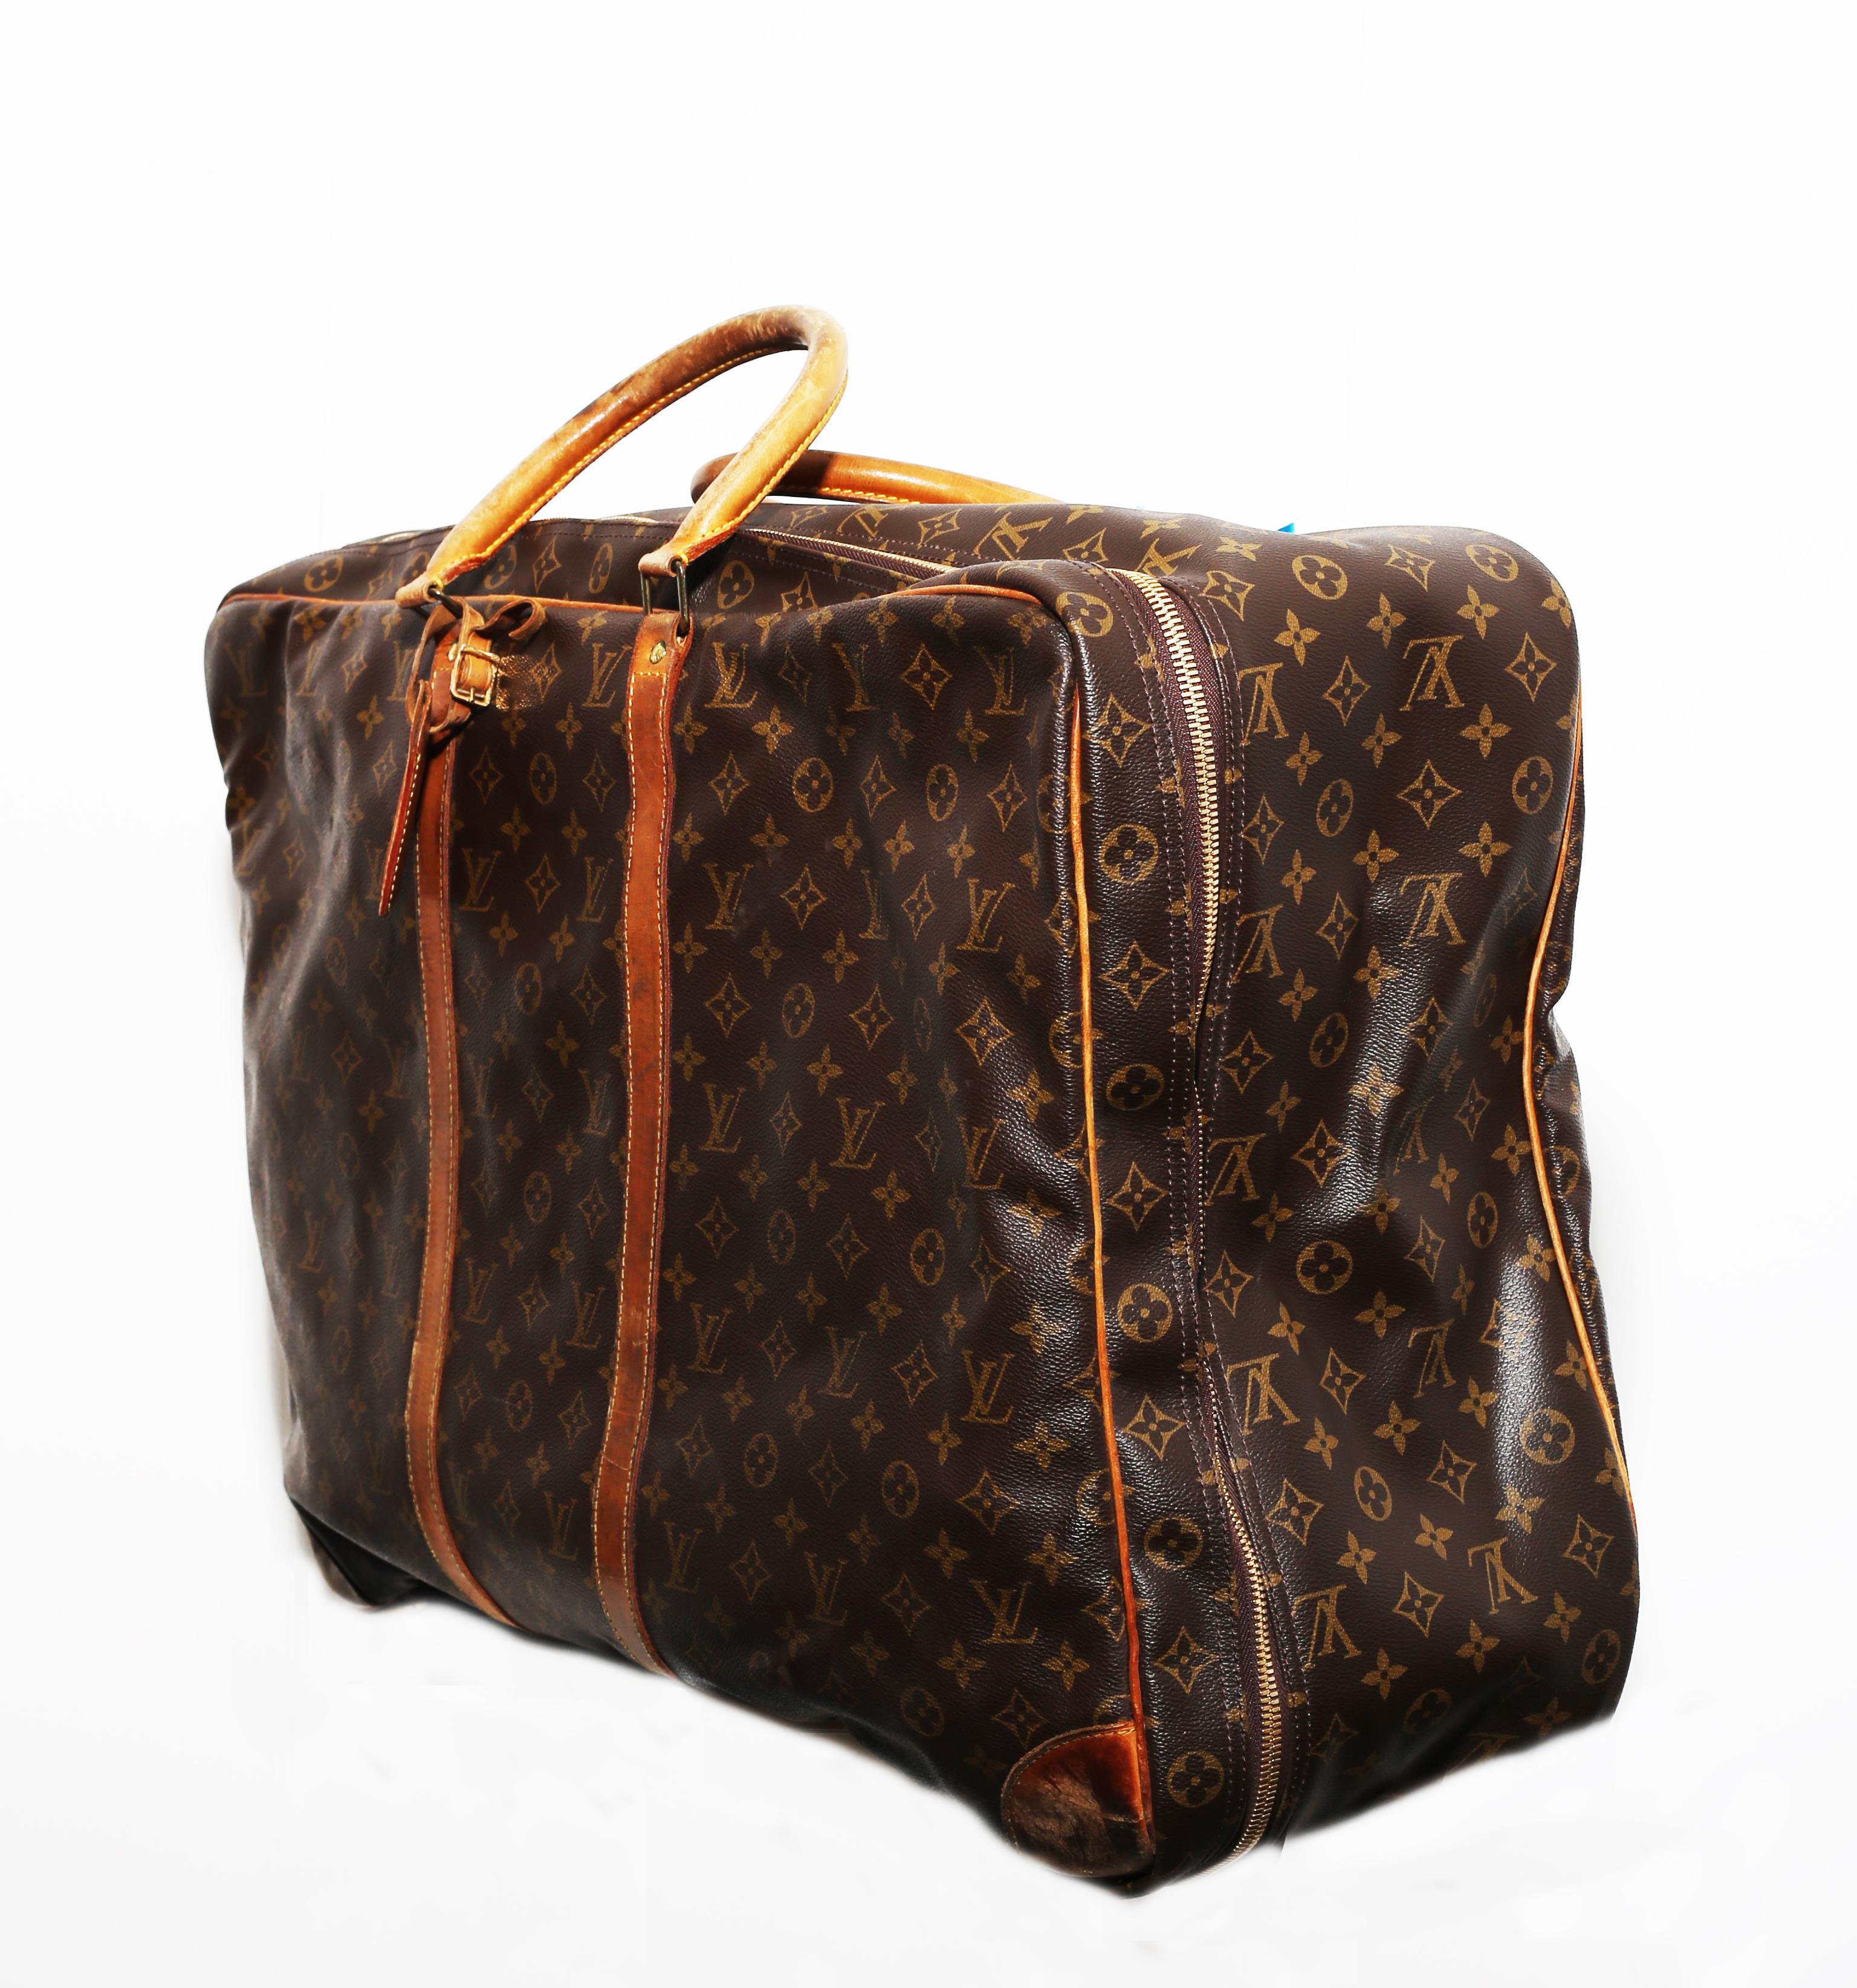 Louis Vuitton Monogram Sirius Suitcase 70cm Luggage Weekender Travel Bag 80s
 This beautiful luggage is in good condition. The luggage does have some wear to it but still looks good as new. There are two beige handles and two beige leather strips